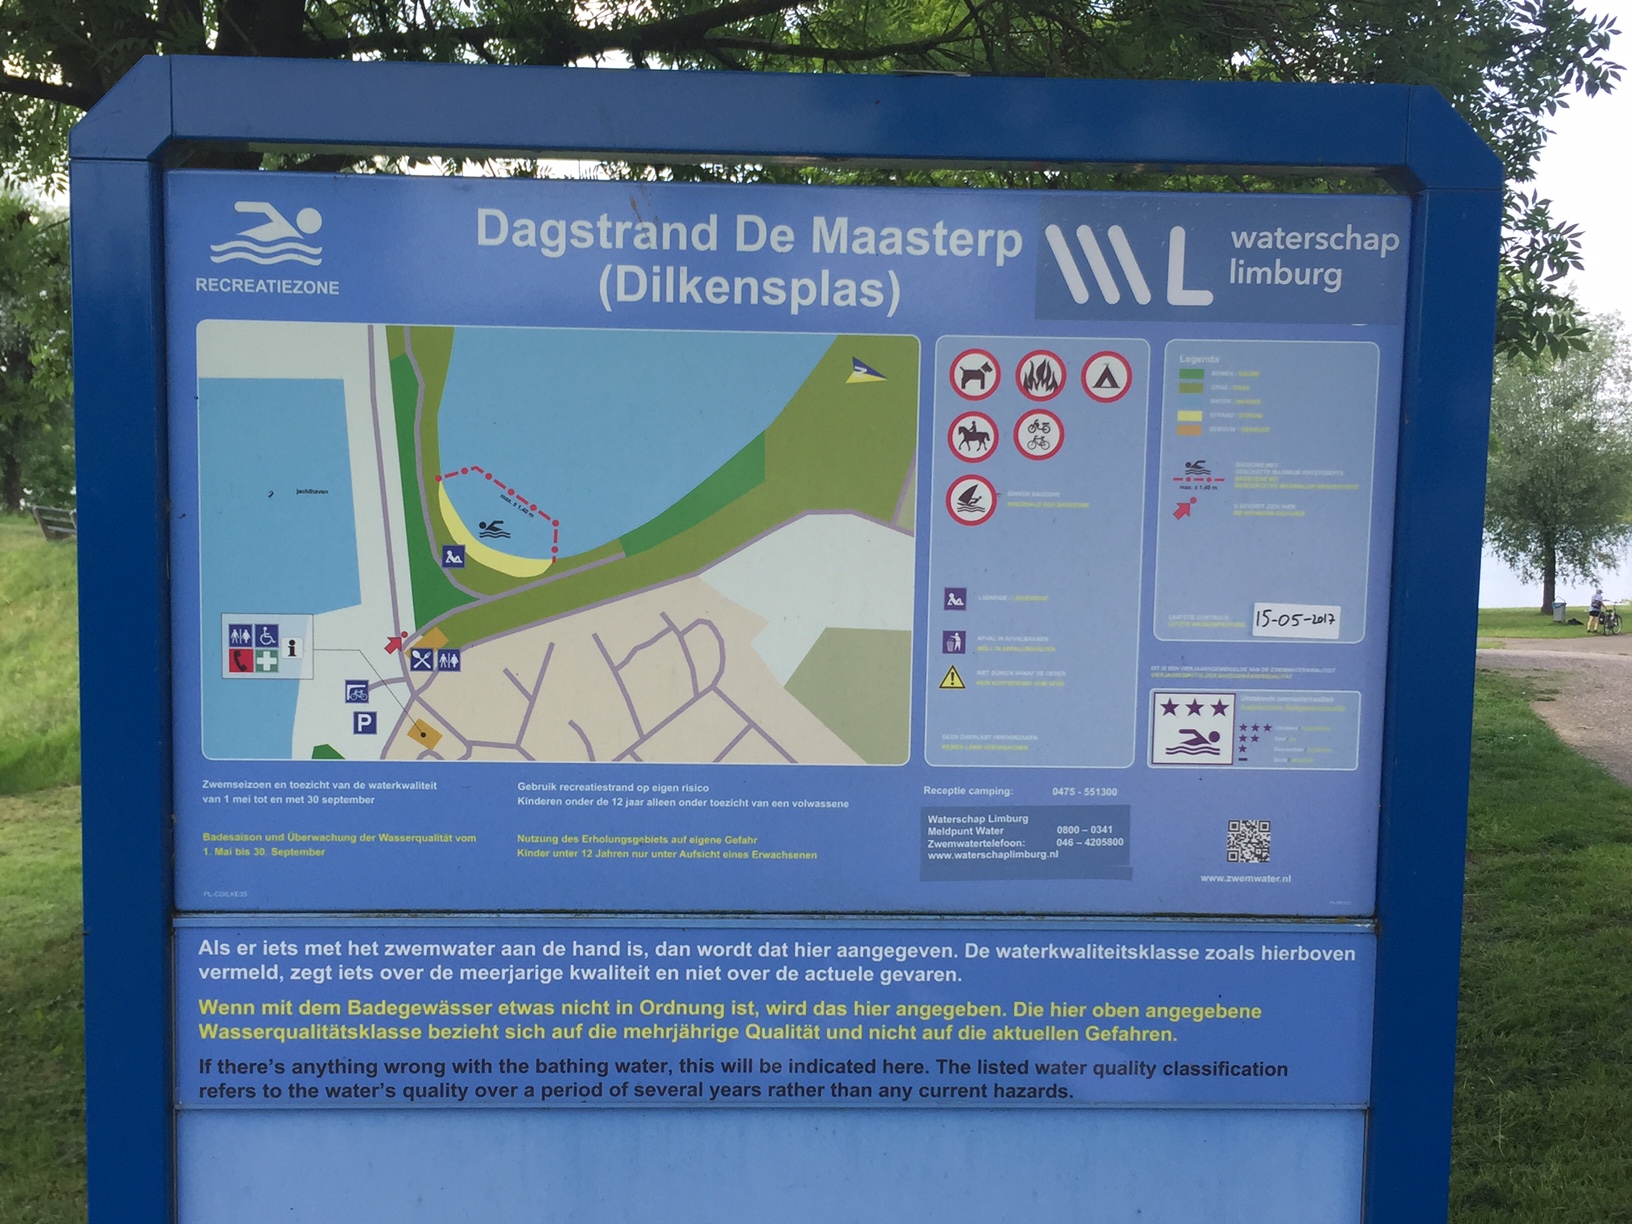 The information board at the swimming location Dilkensplas